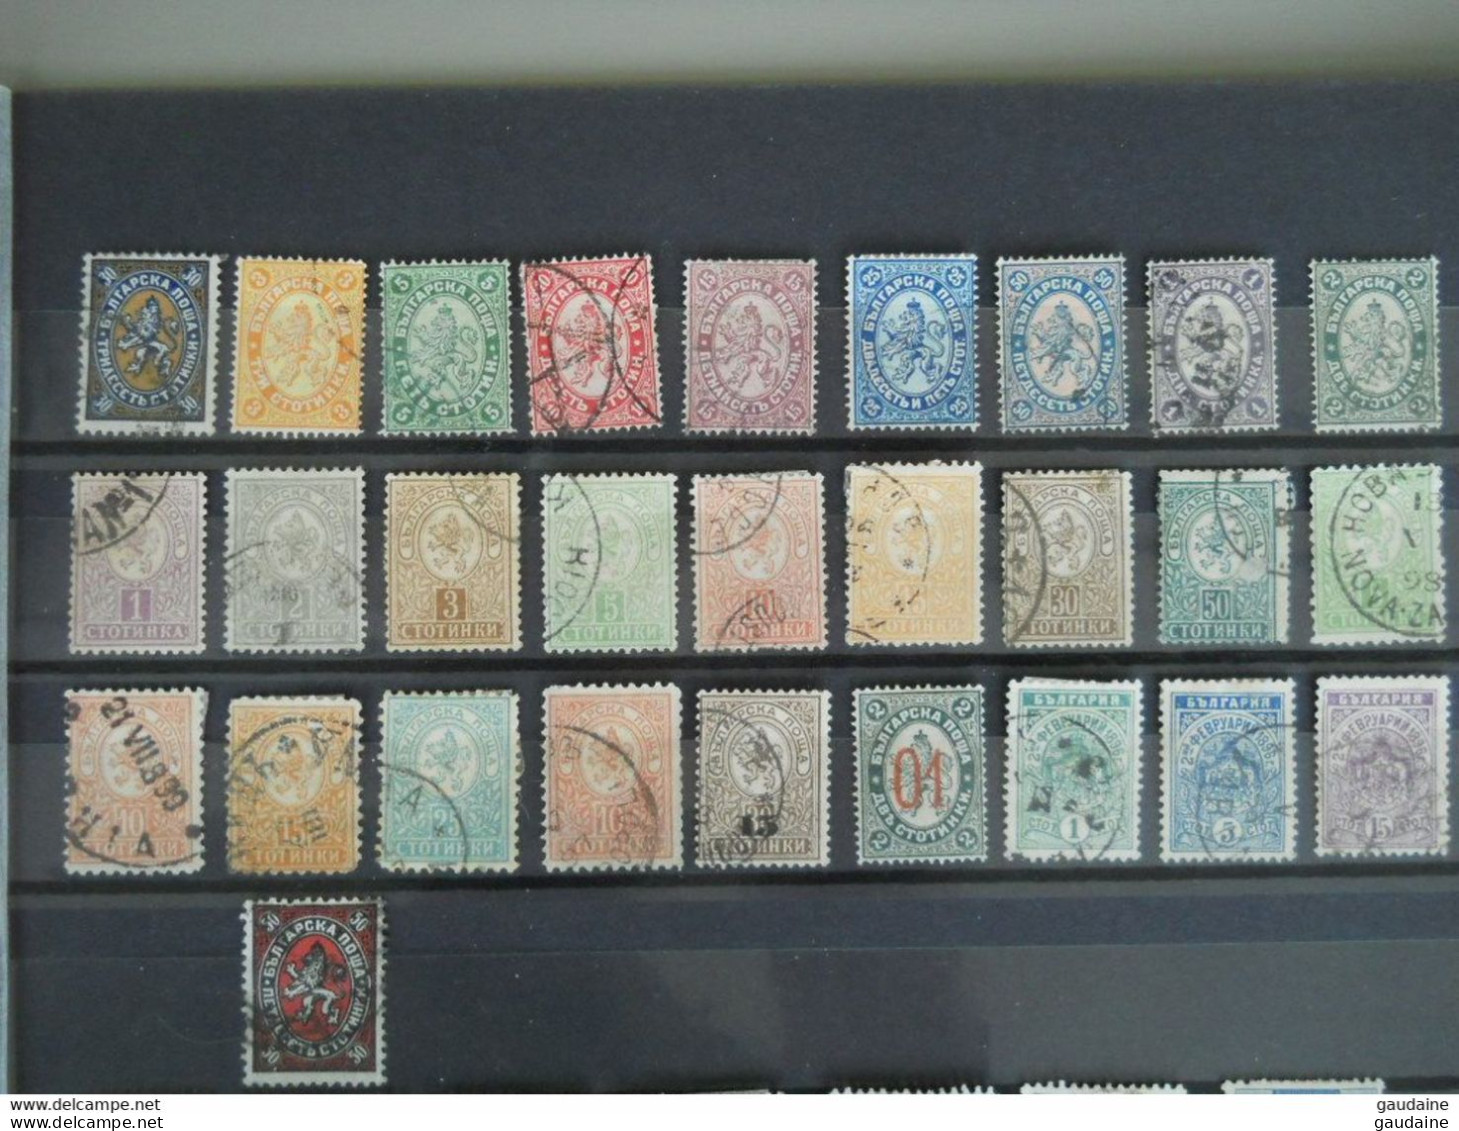 BULGARIE - BULGARIA -  LOT De Timbres  - 1881/1882/85  1889/96 - Y&T N°11 14 15 16 17 18 20 21 22 28 à 33 31A 35 36 ... - Used Stamps